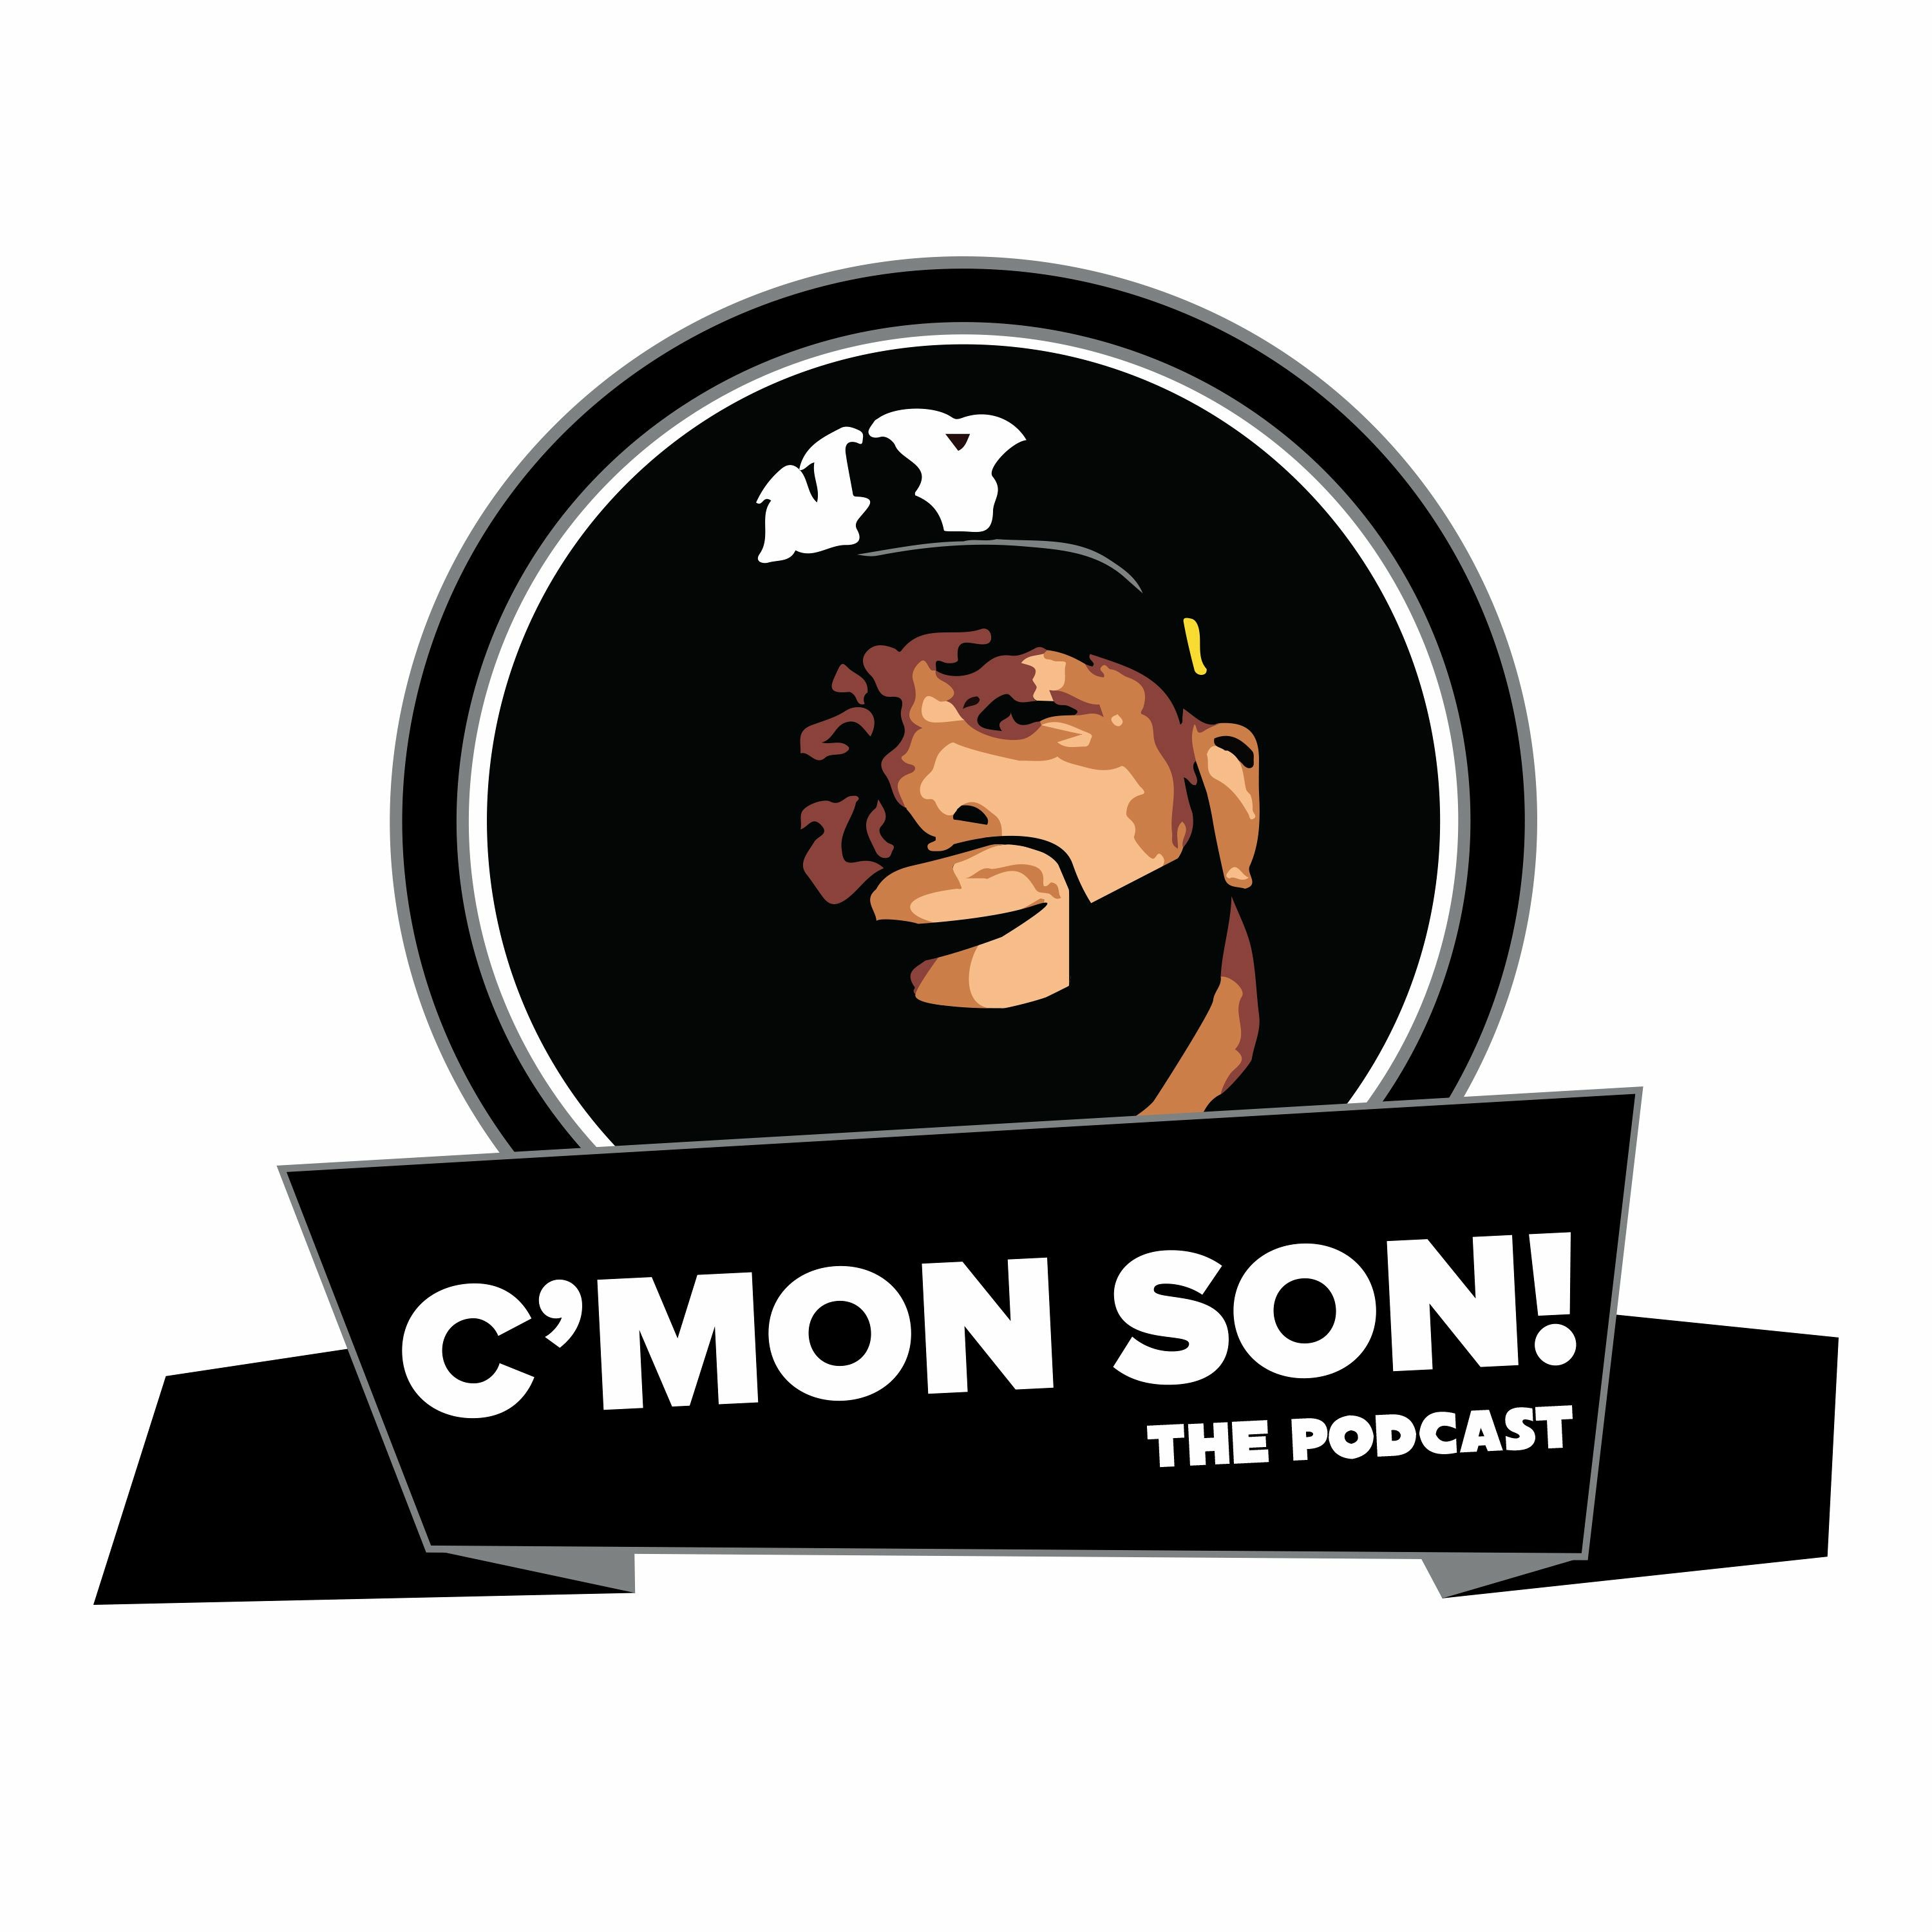 C'Mon Son! The Podcast Series #2 Episode #18: The Pressure's of "The Industry"